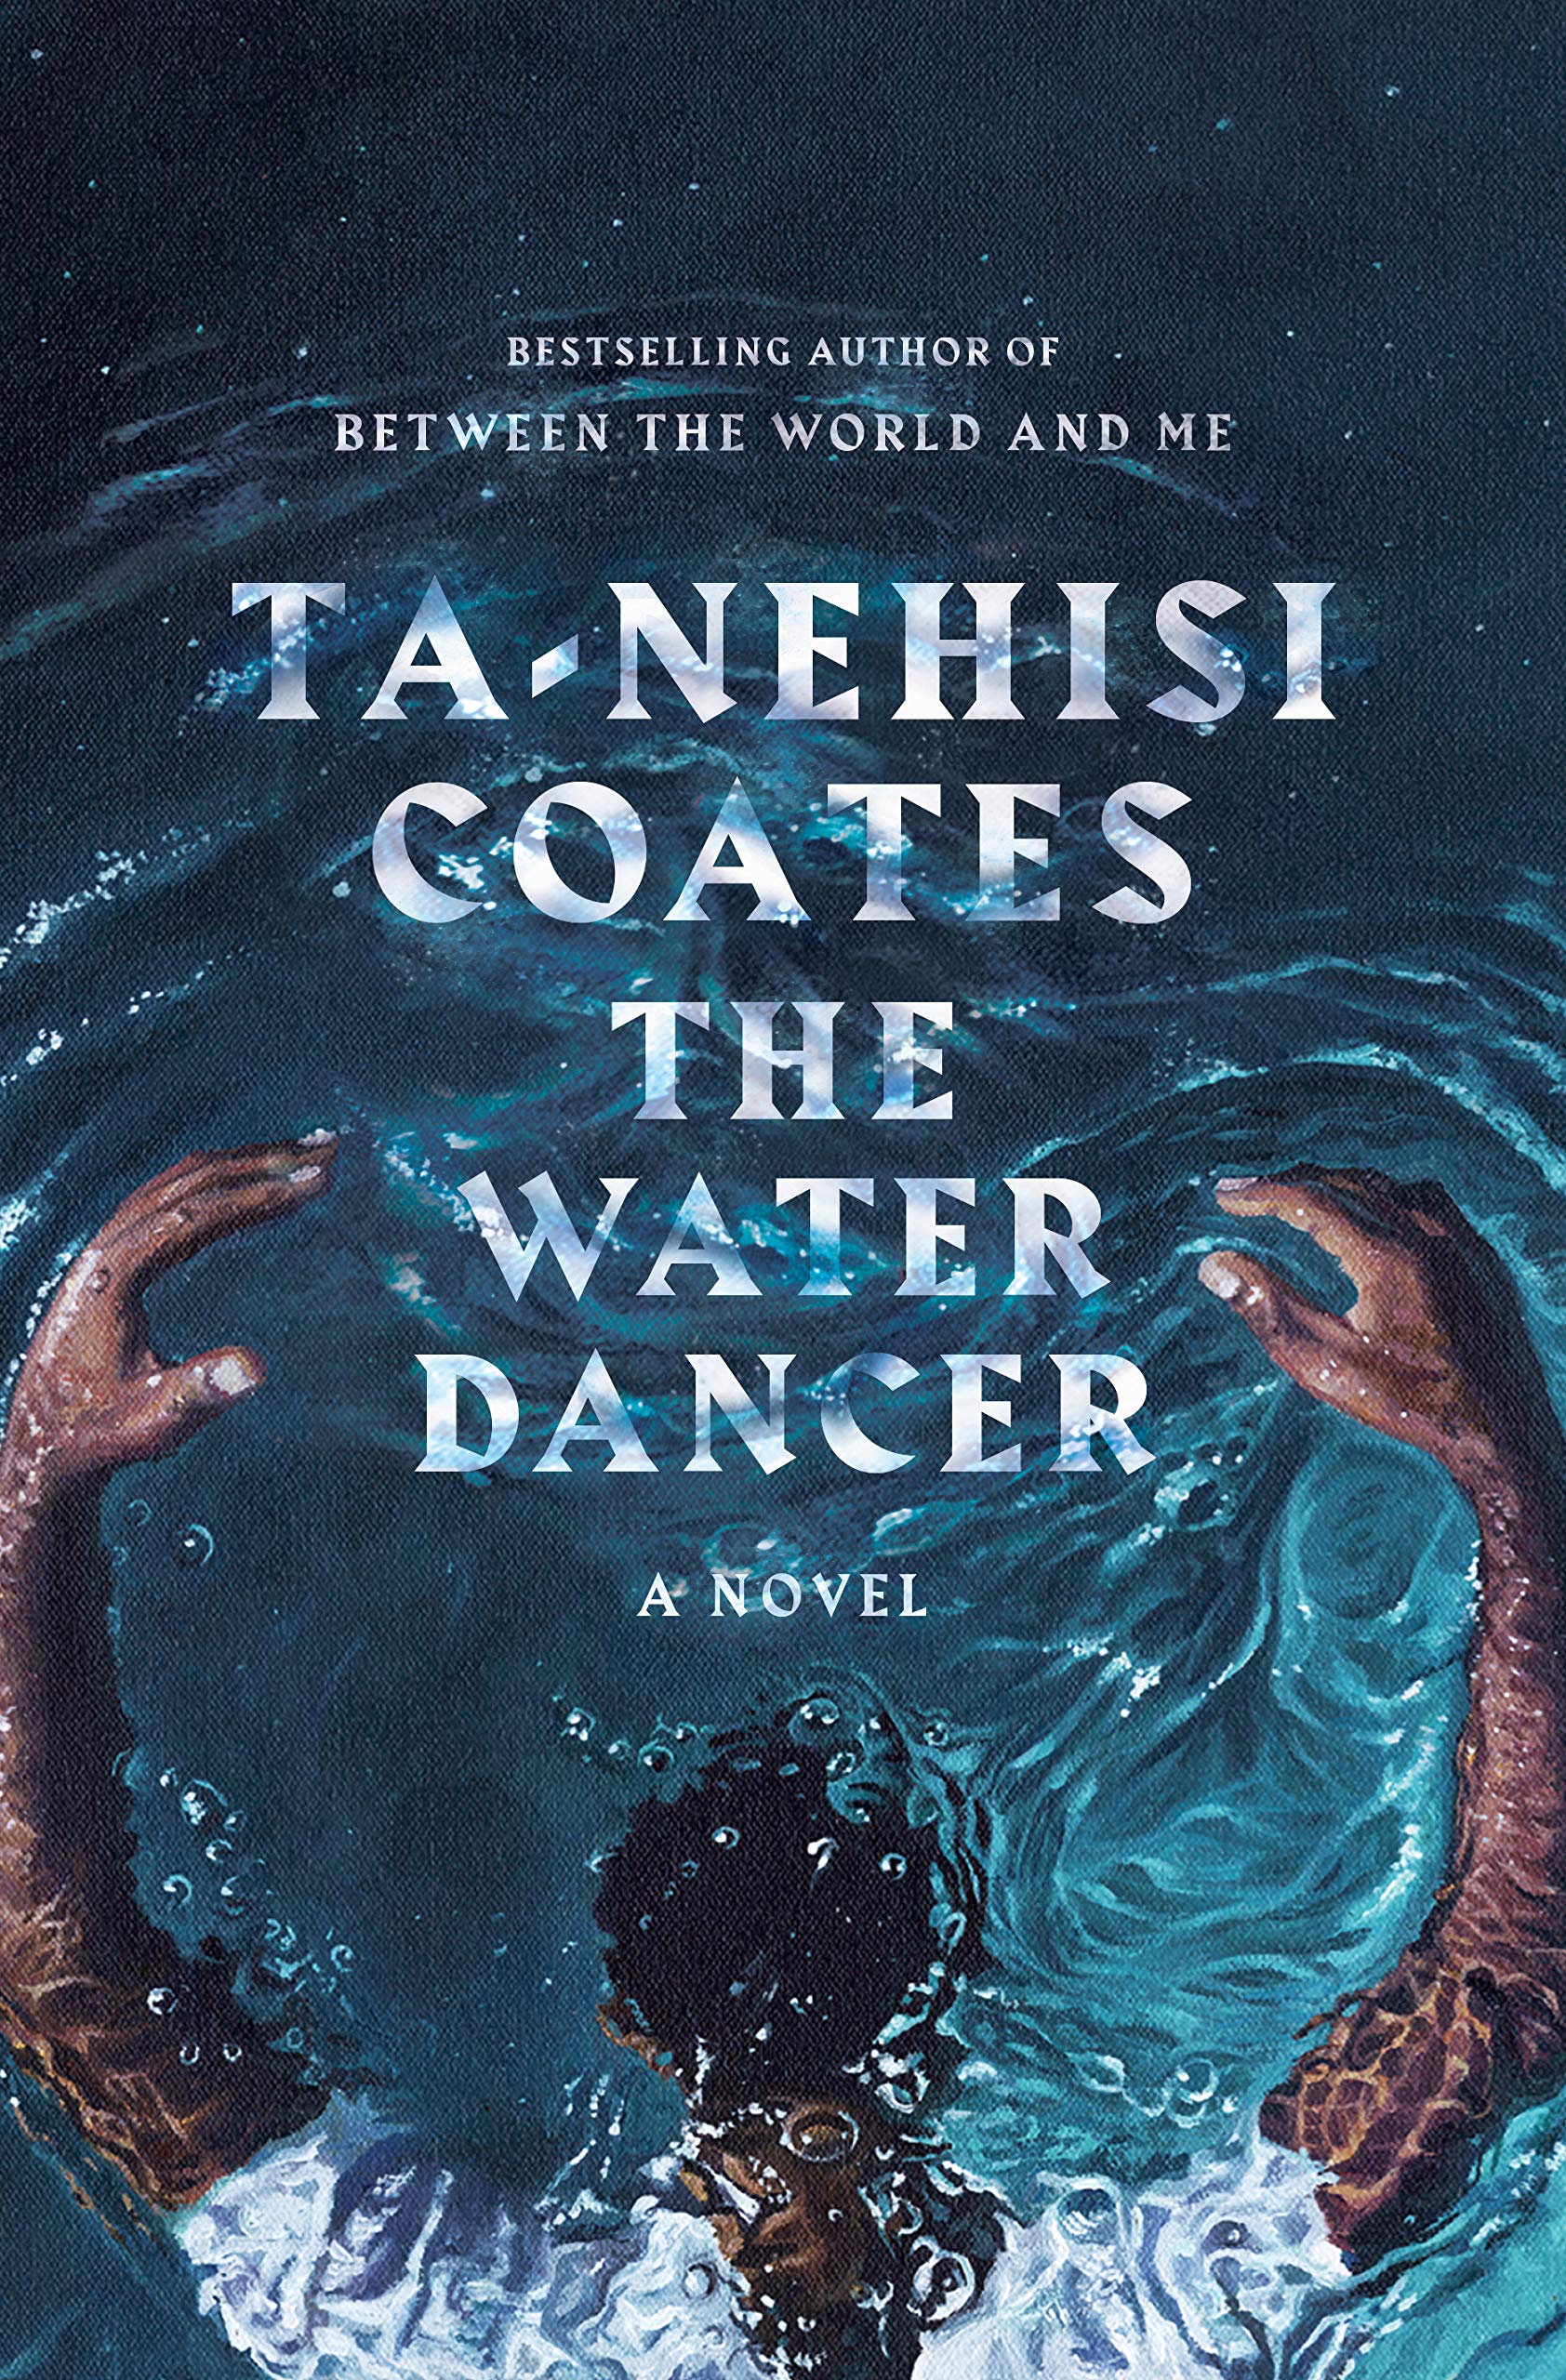 A book cover displaying the title "the water dancer" by ta-nehisi coates, featuring an evocative illustration of hands emerging from a dark body of water, creating a circular splash and ripples around them, set against a backdrop of a starry night sky.